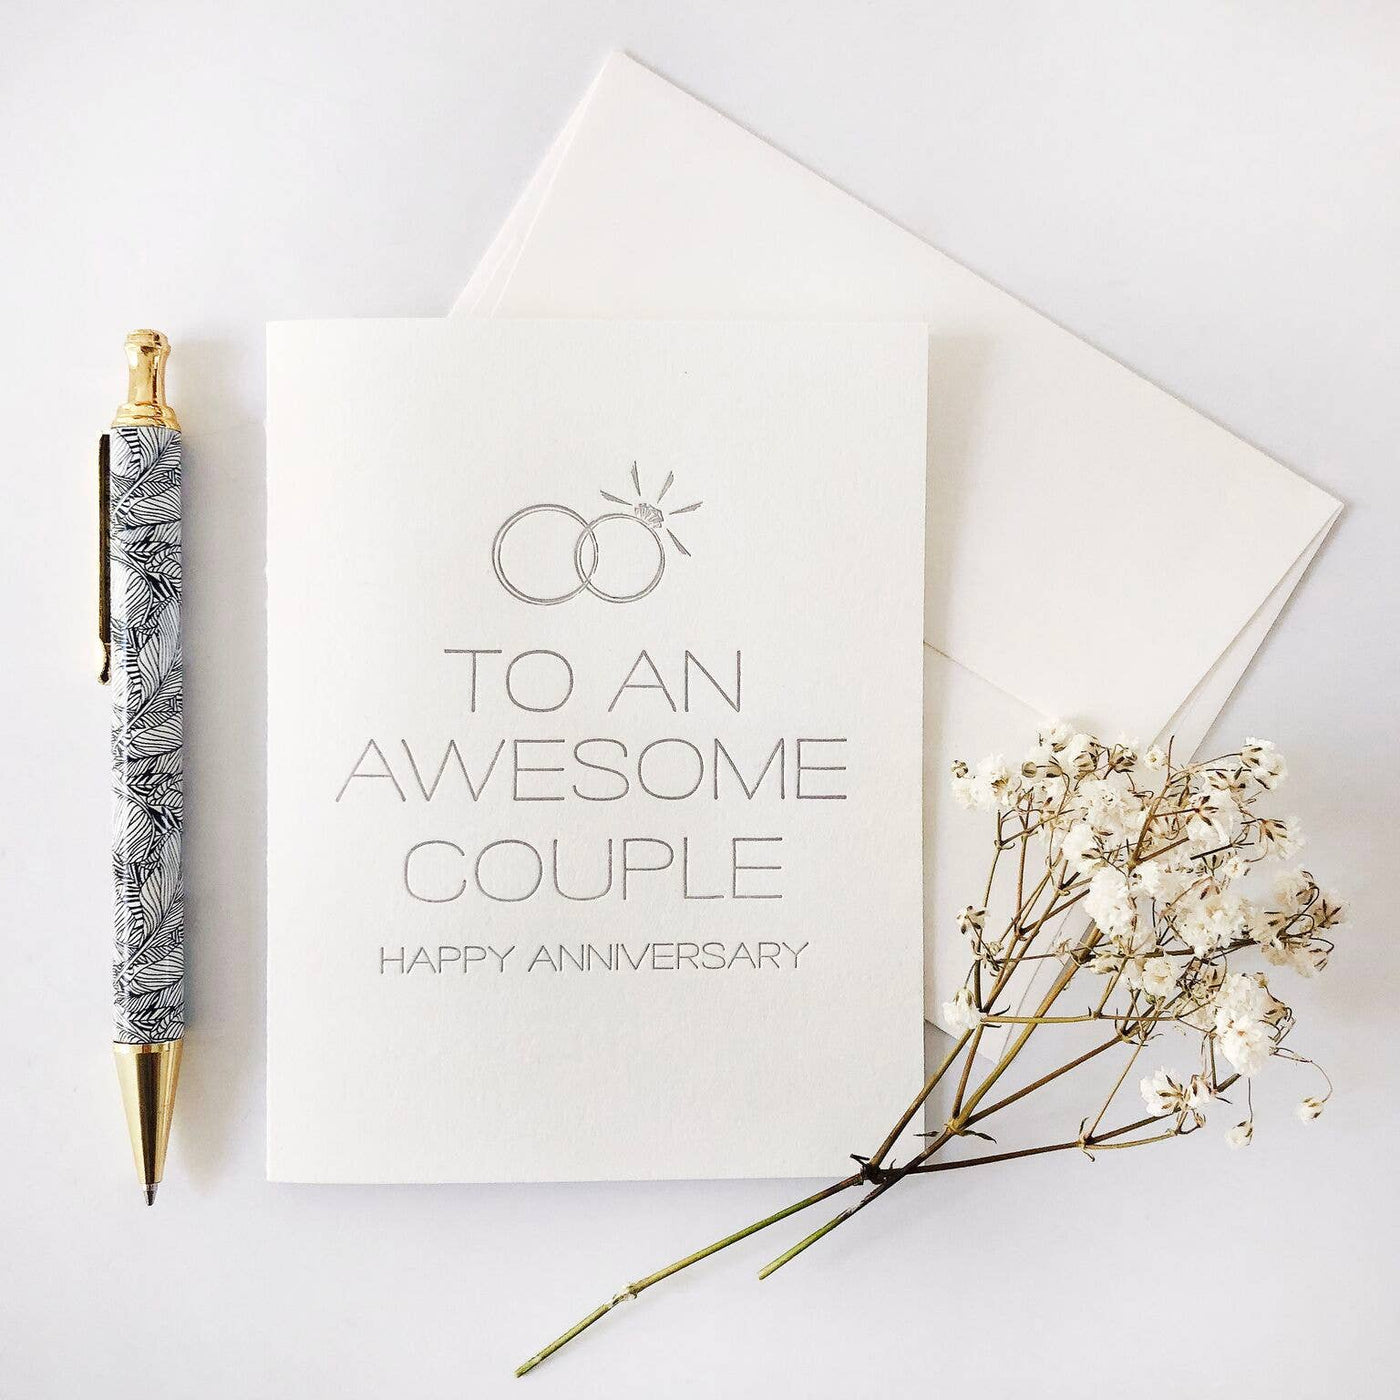 Steel Petal Press - Awesome Couple Anniversary Card